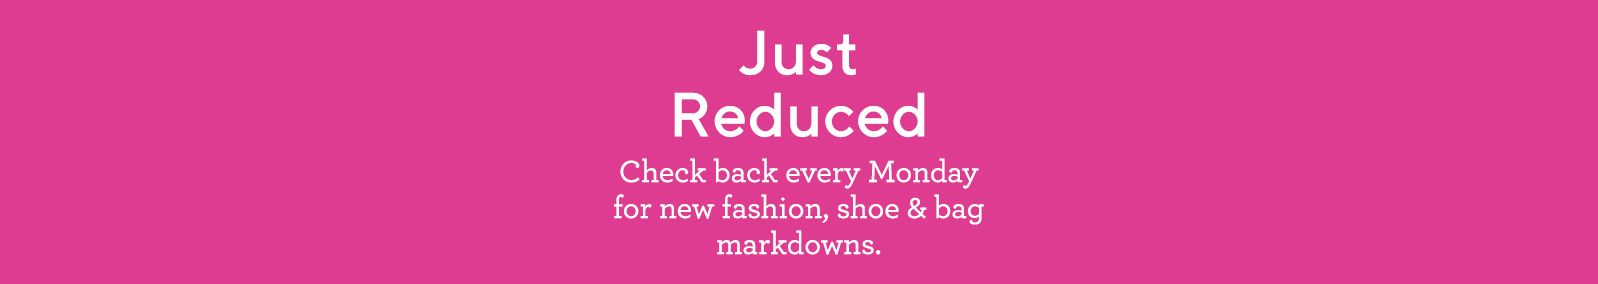 Just Reduced  Check back every Monday for new fashion, shoe & bag markdowns.